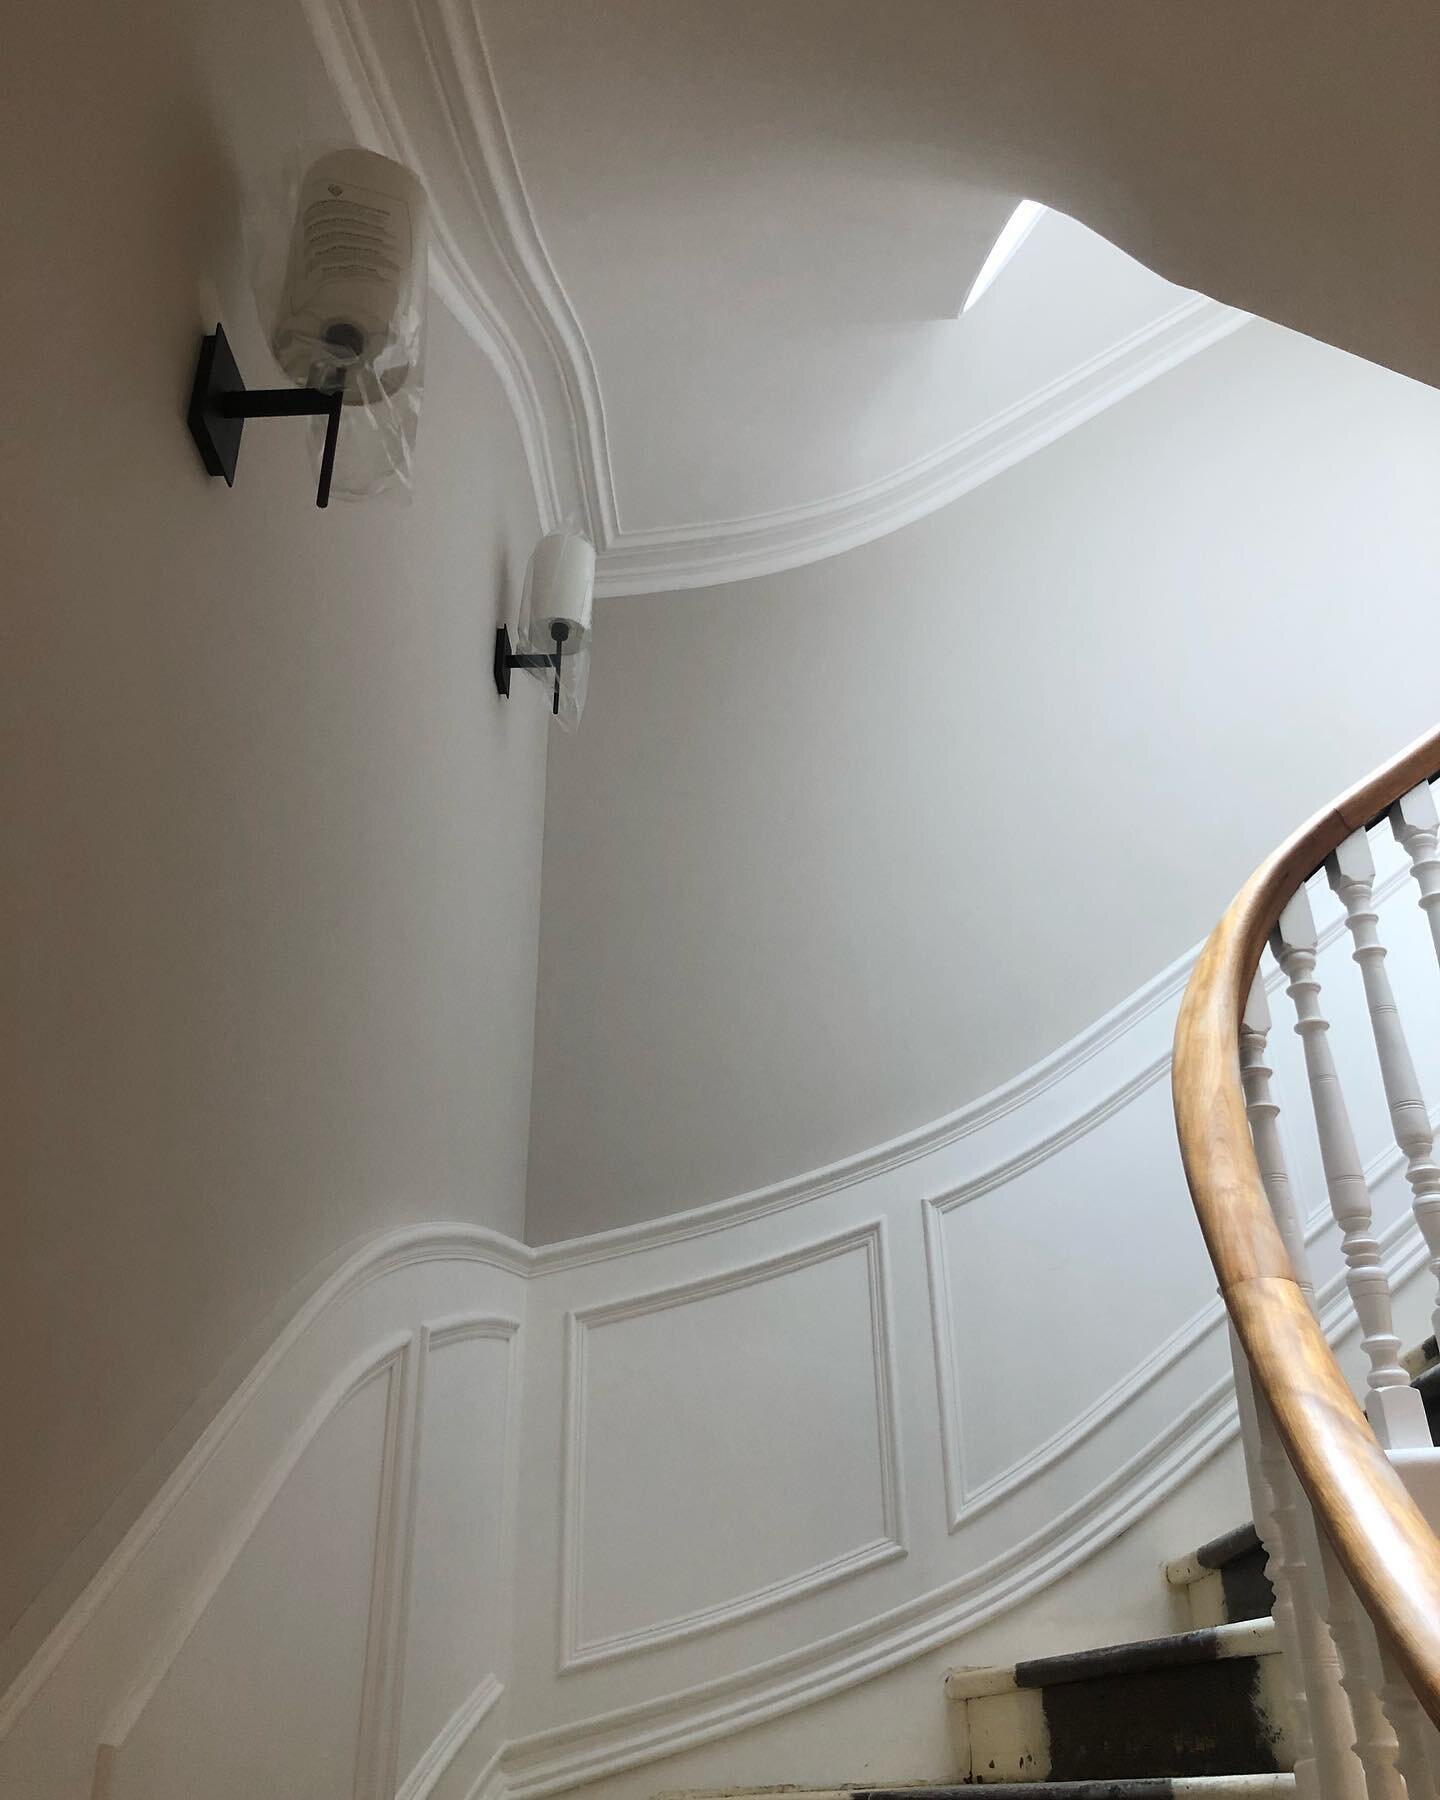 Stairwell nearing completion on site, new timber panelling and walls painted, lights on, just waiting for carpet!
.
.
.

#architect #architecture #designer #aberdeenshire #contemporarydesign #contemporaryhome #architecturelovers #fineinteriors #inter